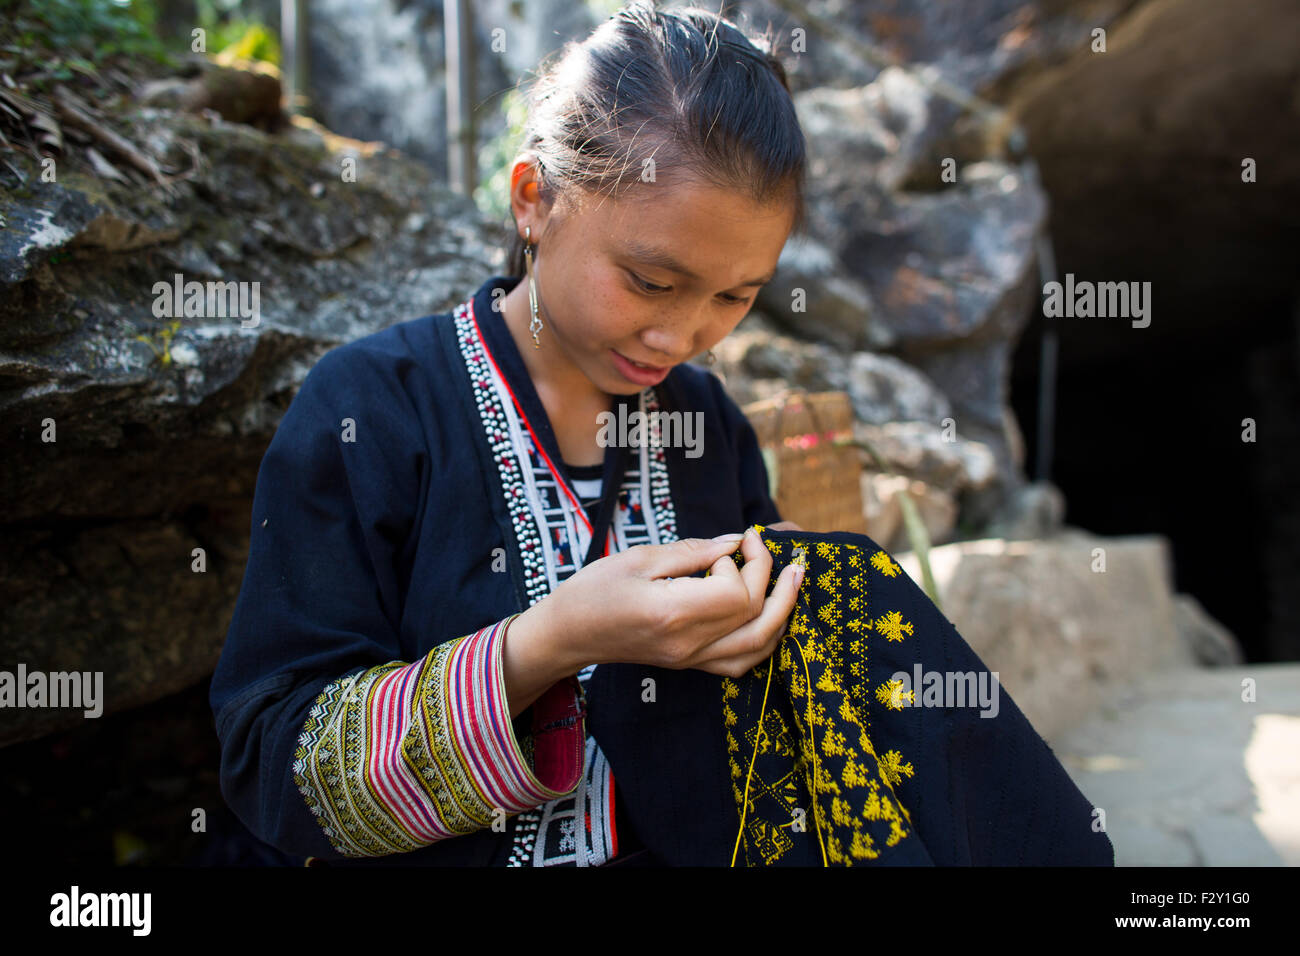 Girl of the ethnic 'black Hmong' tribe embroider traditional clothing Stock Photo